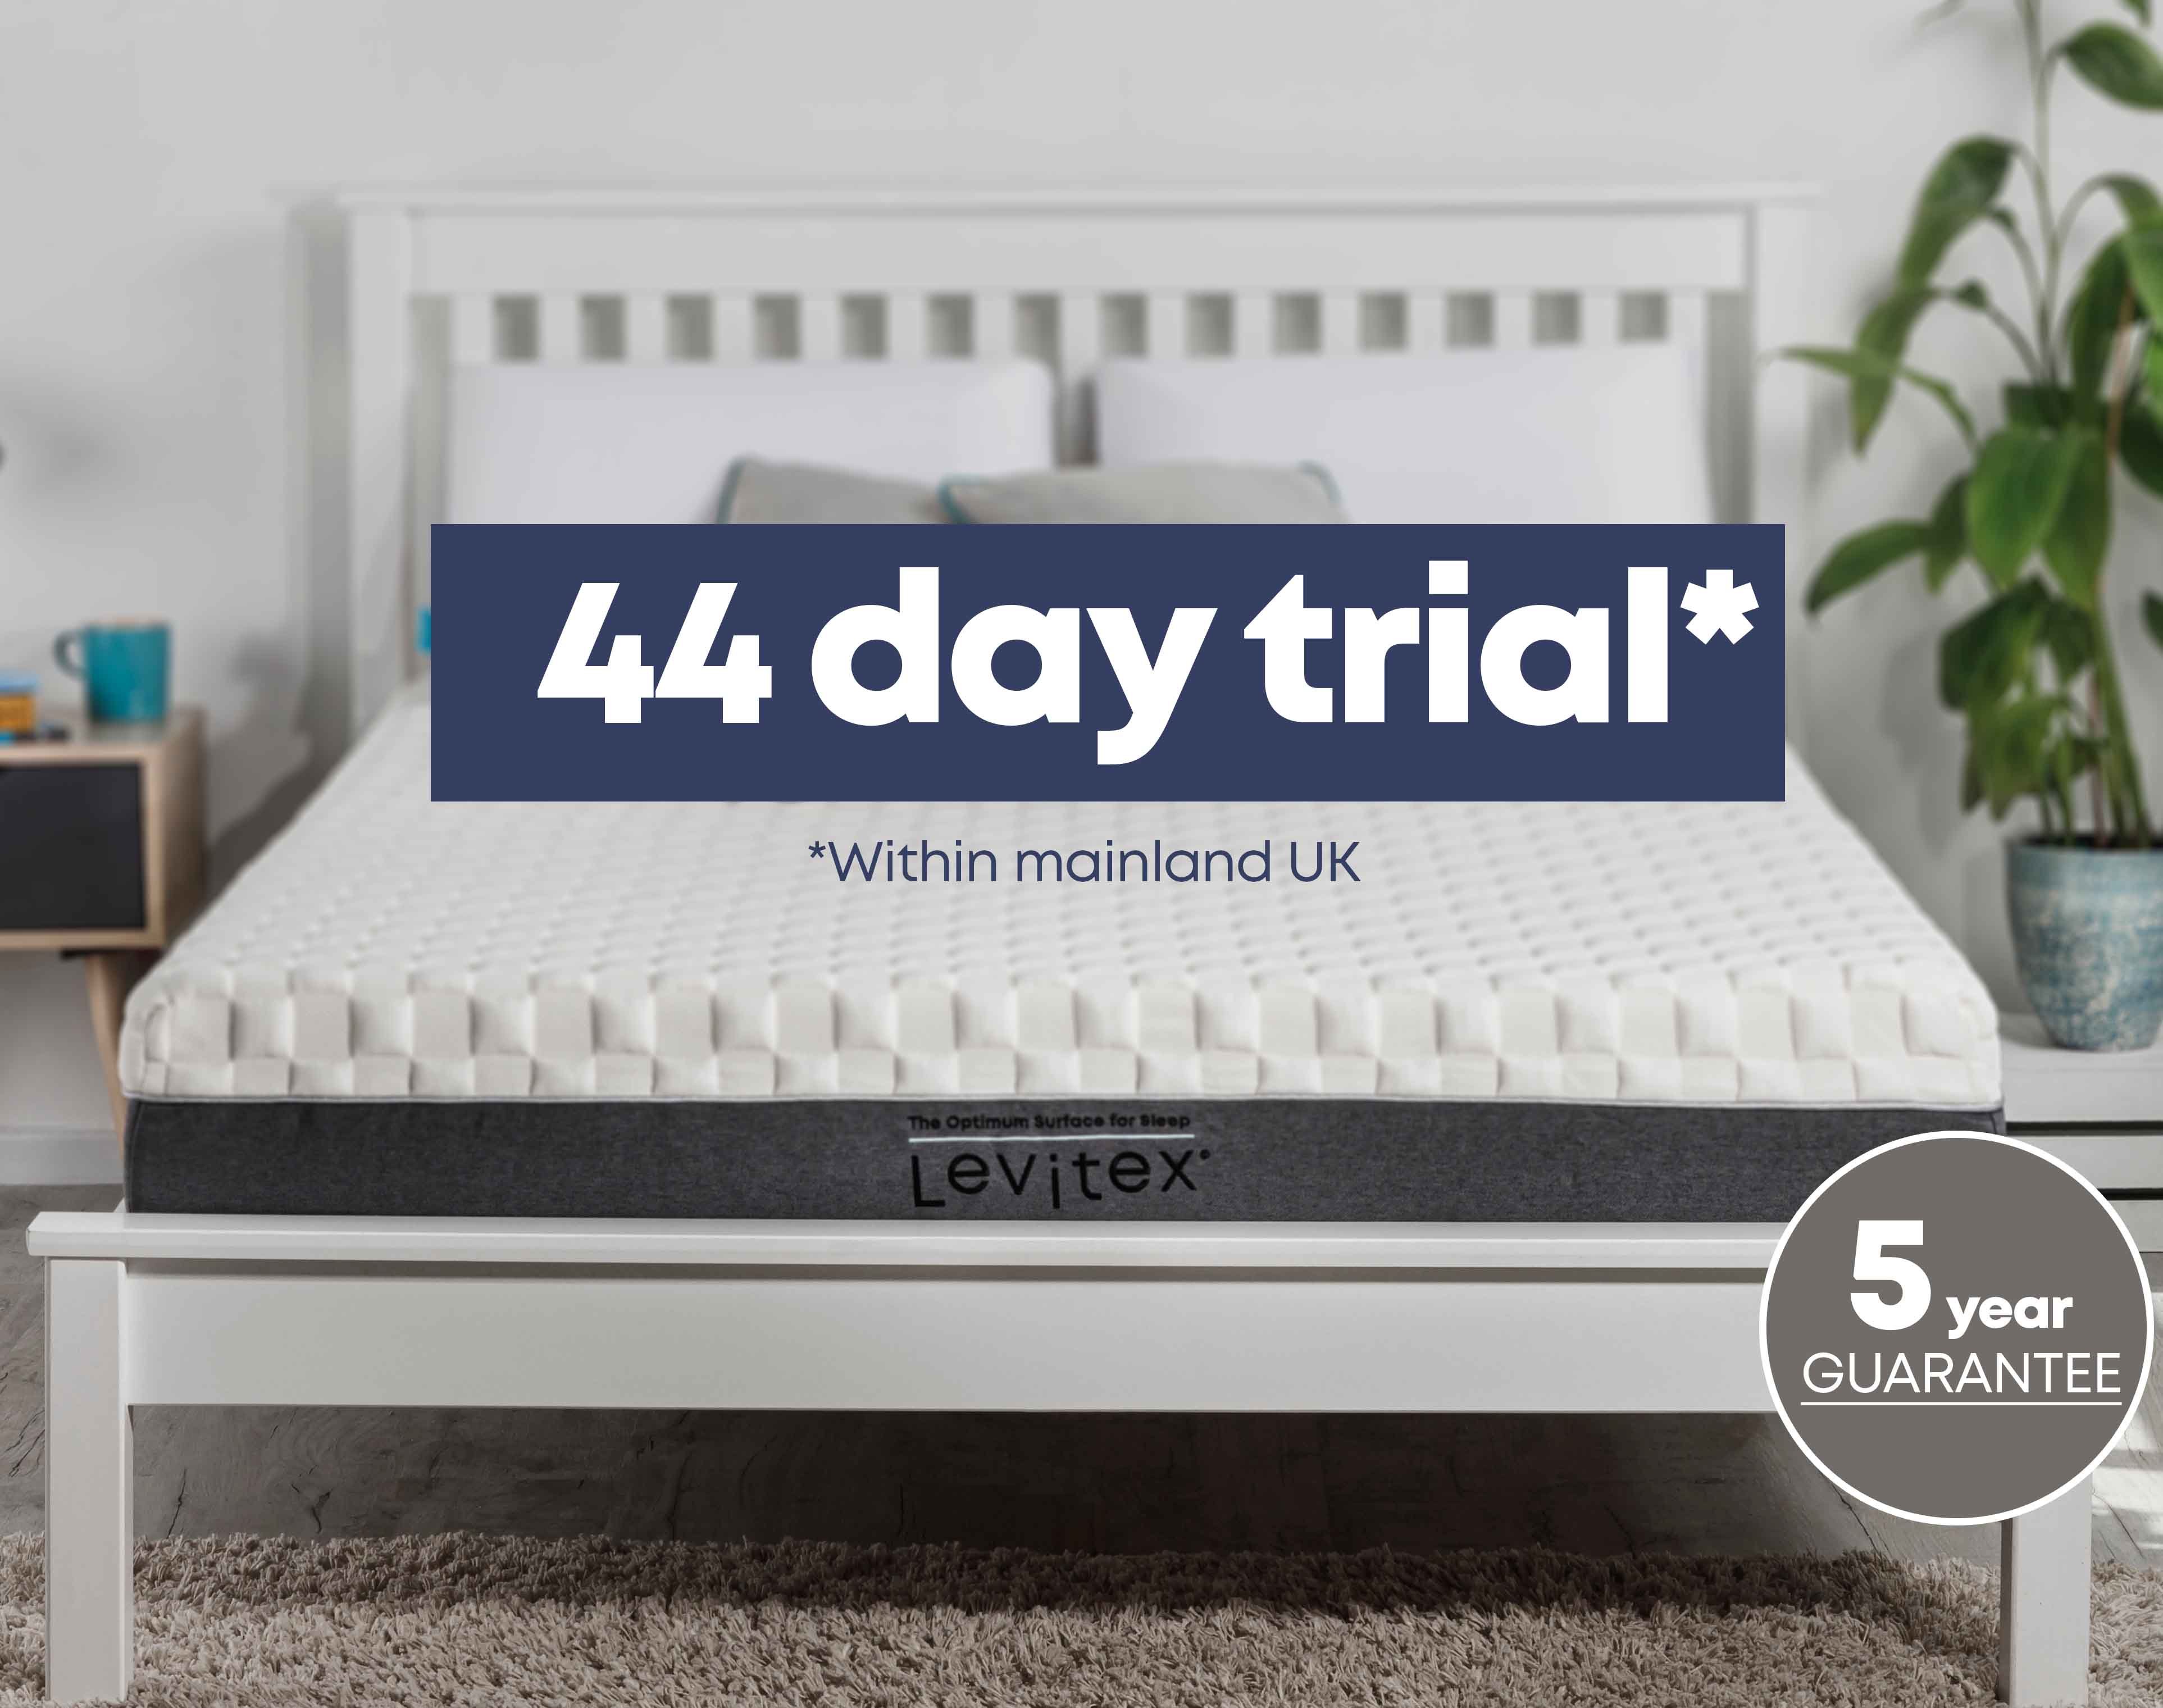 mattress 44 day trial and 5 year guarantee